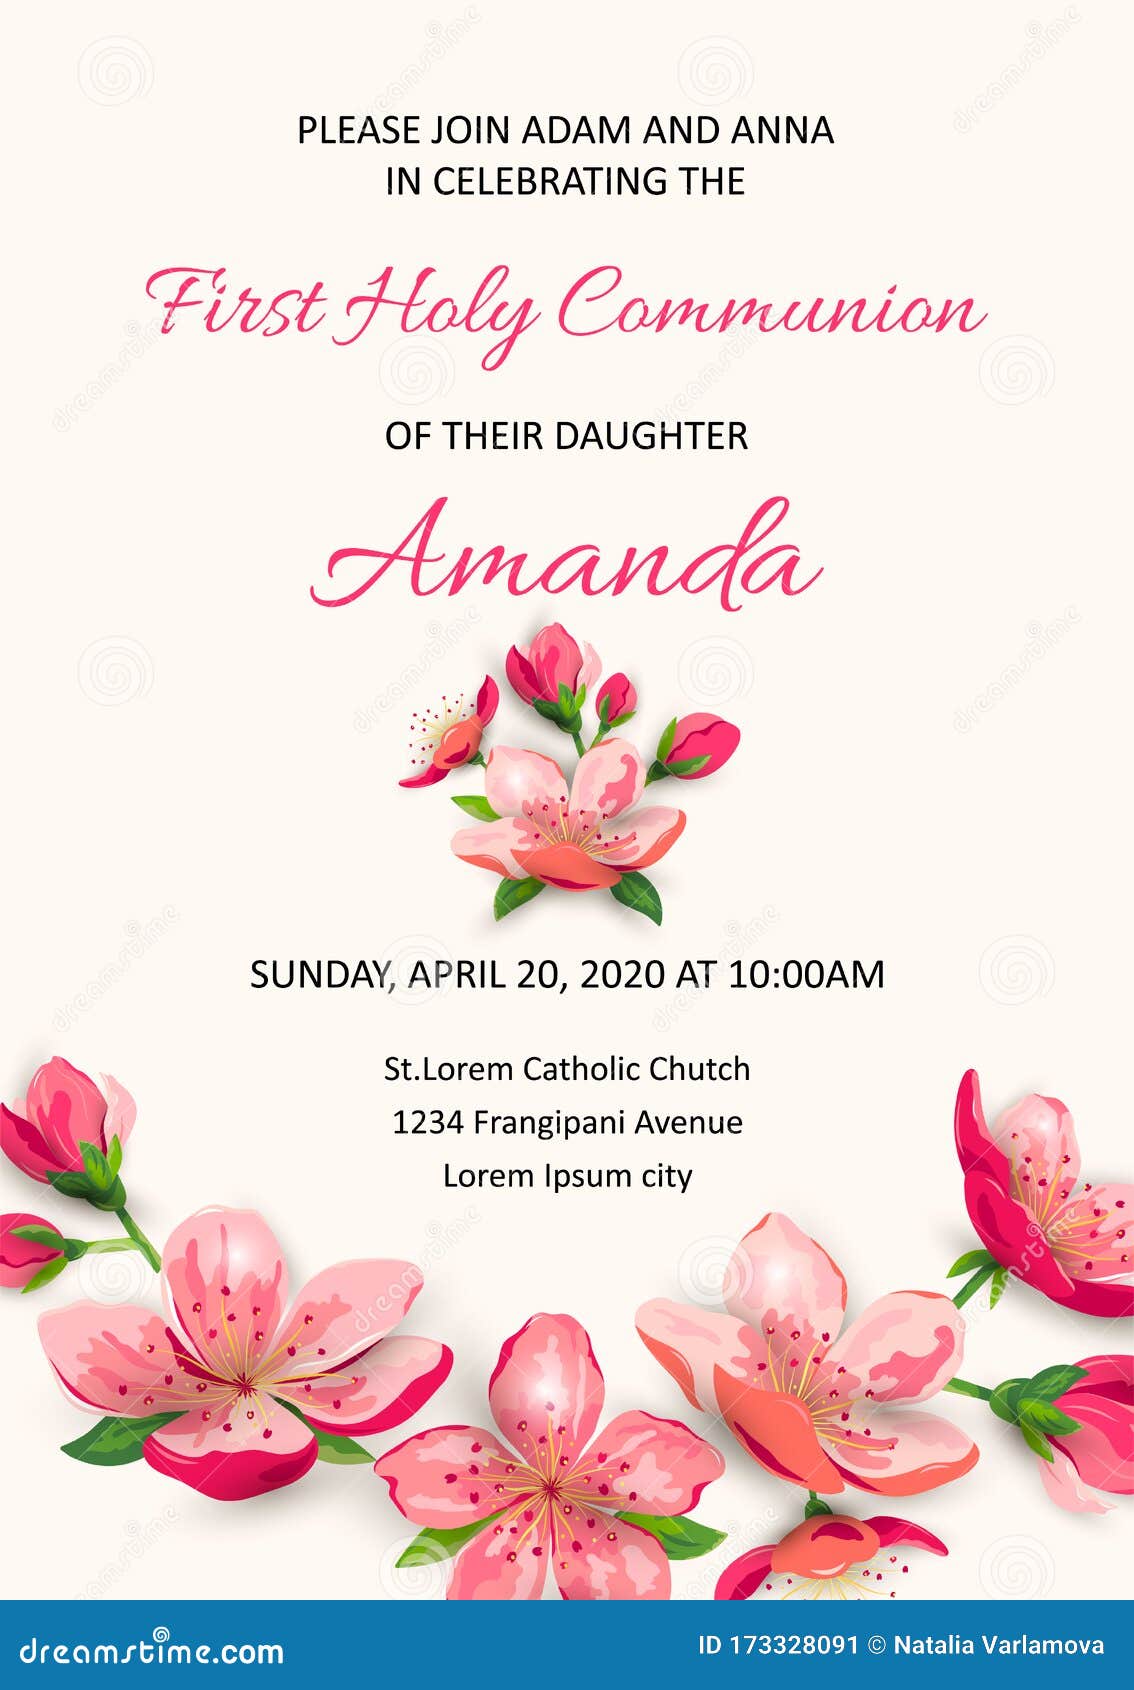 Blessed Invitation Card: A Perfect Way to Celebrate